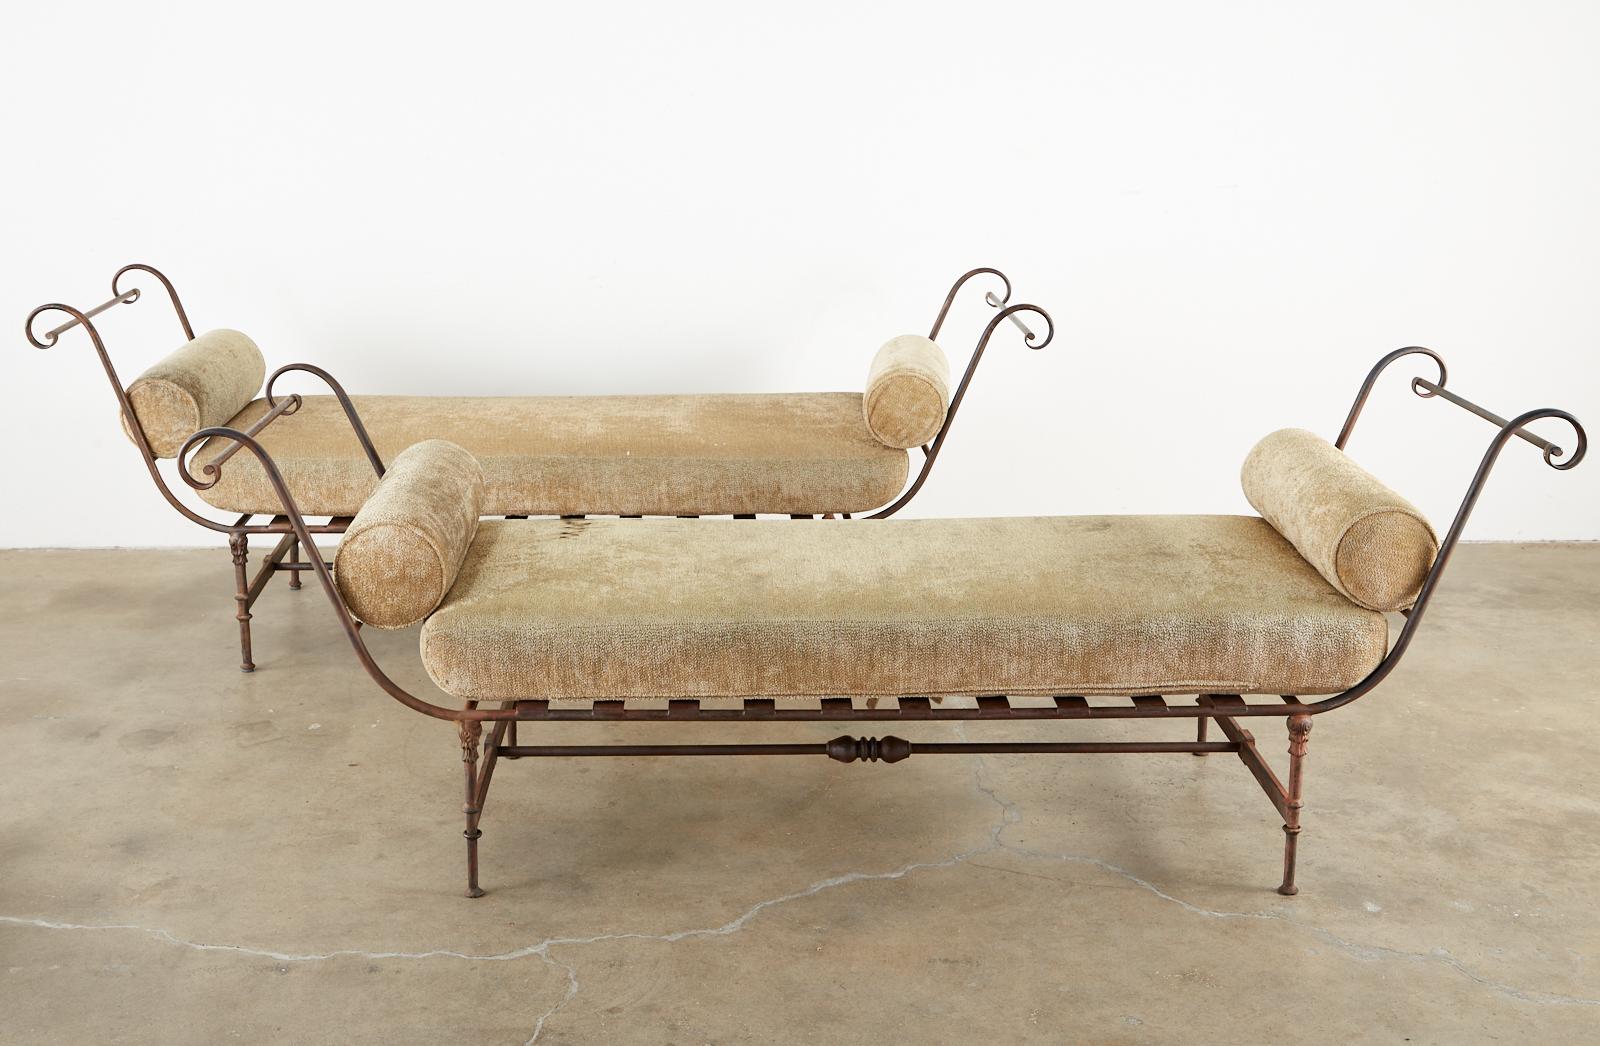 Matching pair of iron garden daybeds or benches made in the neoclassical taste. The large frames feature gracefully curved handles on each side ending with scrolls. The benches are supported by column style legs decorated with acanthus and conjoined